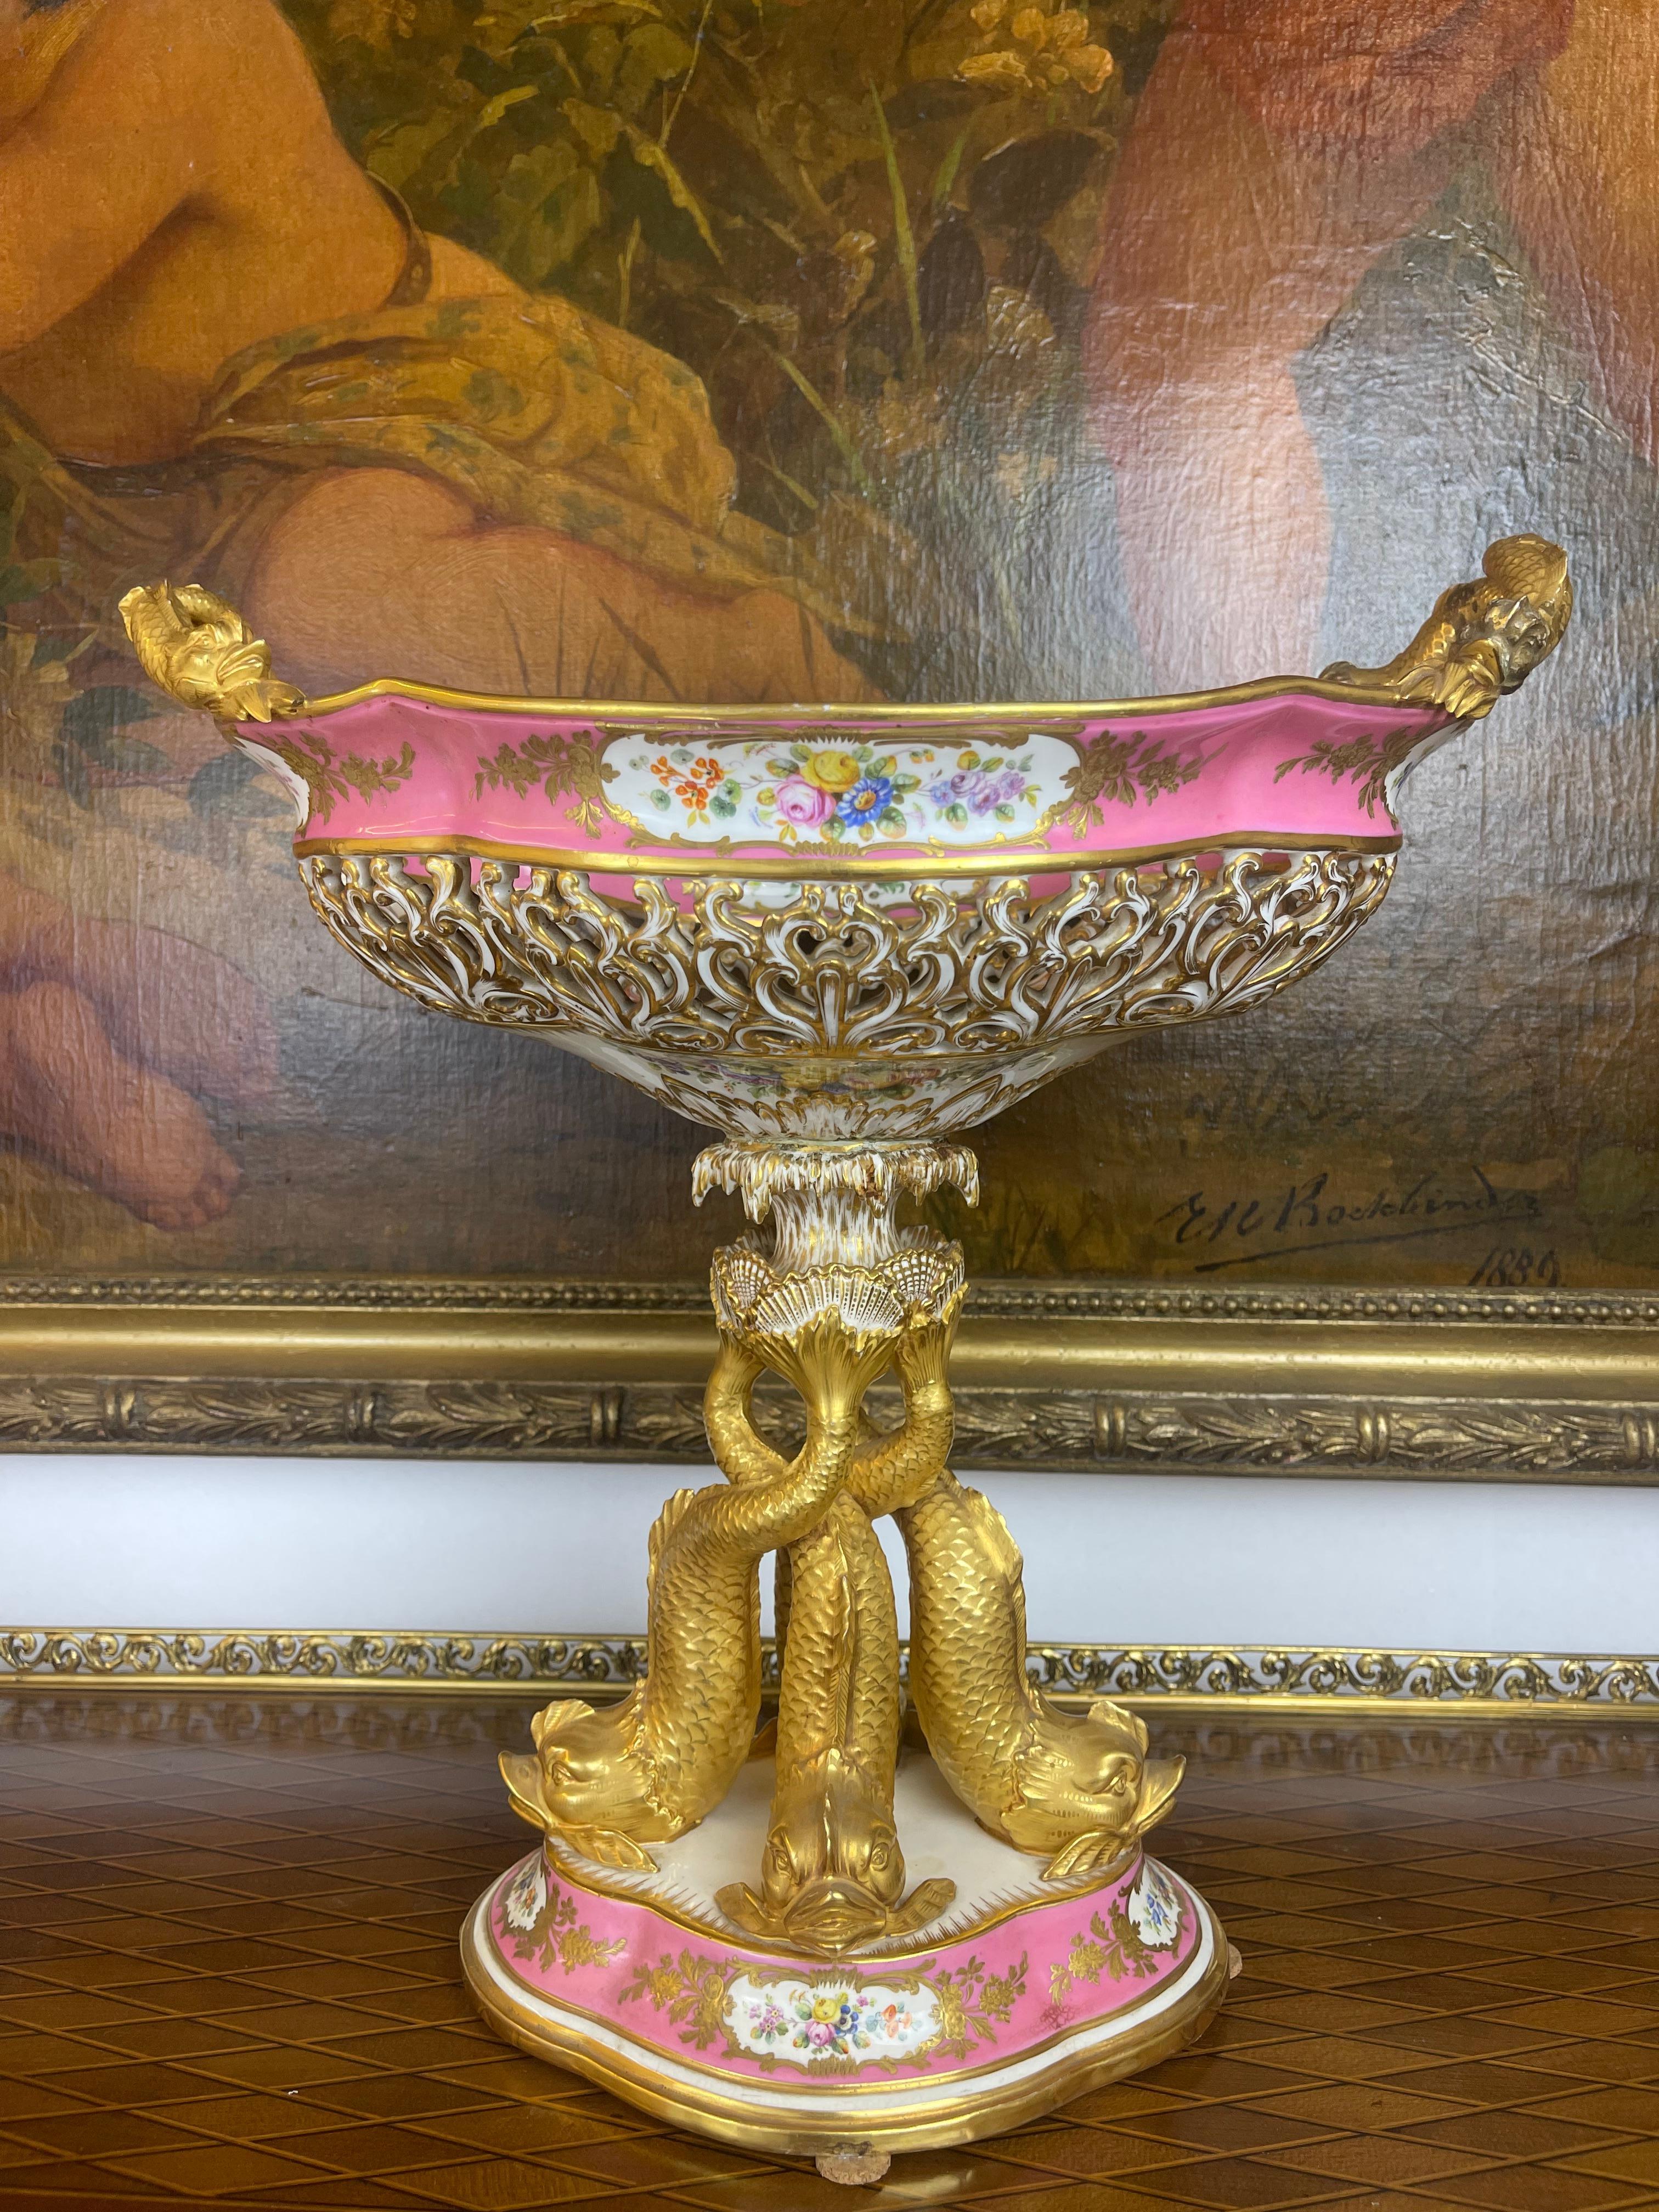 A magnificent & rare georgian pink ground porcelain centerpiece possibly by Minton. Retailer's mark for Daniell London. Circa Mid 19th. Century. The pierced two handled basked supported by three dolphins laid on a oval base. 

Measures: